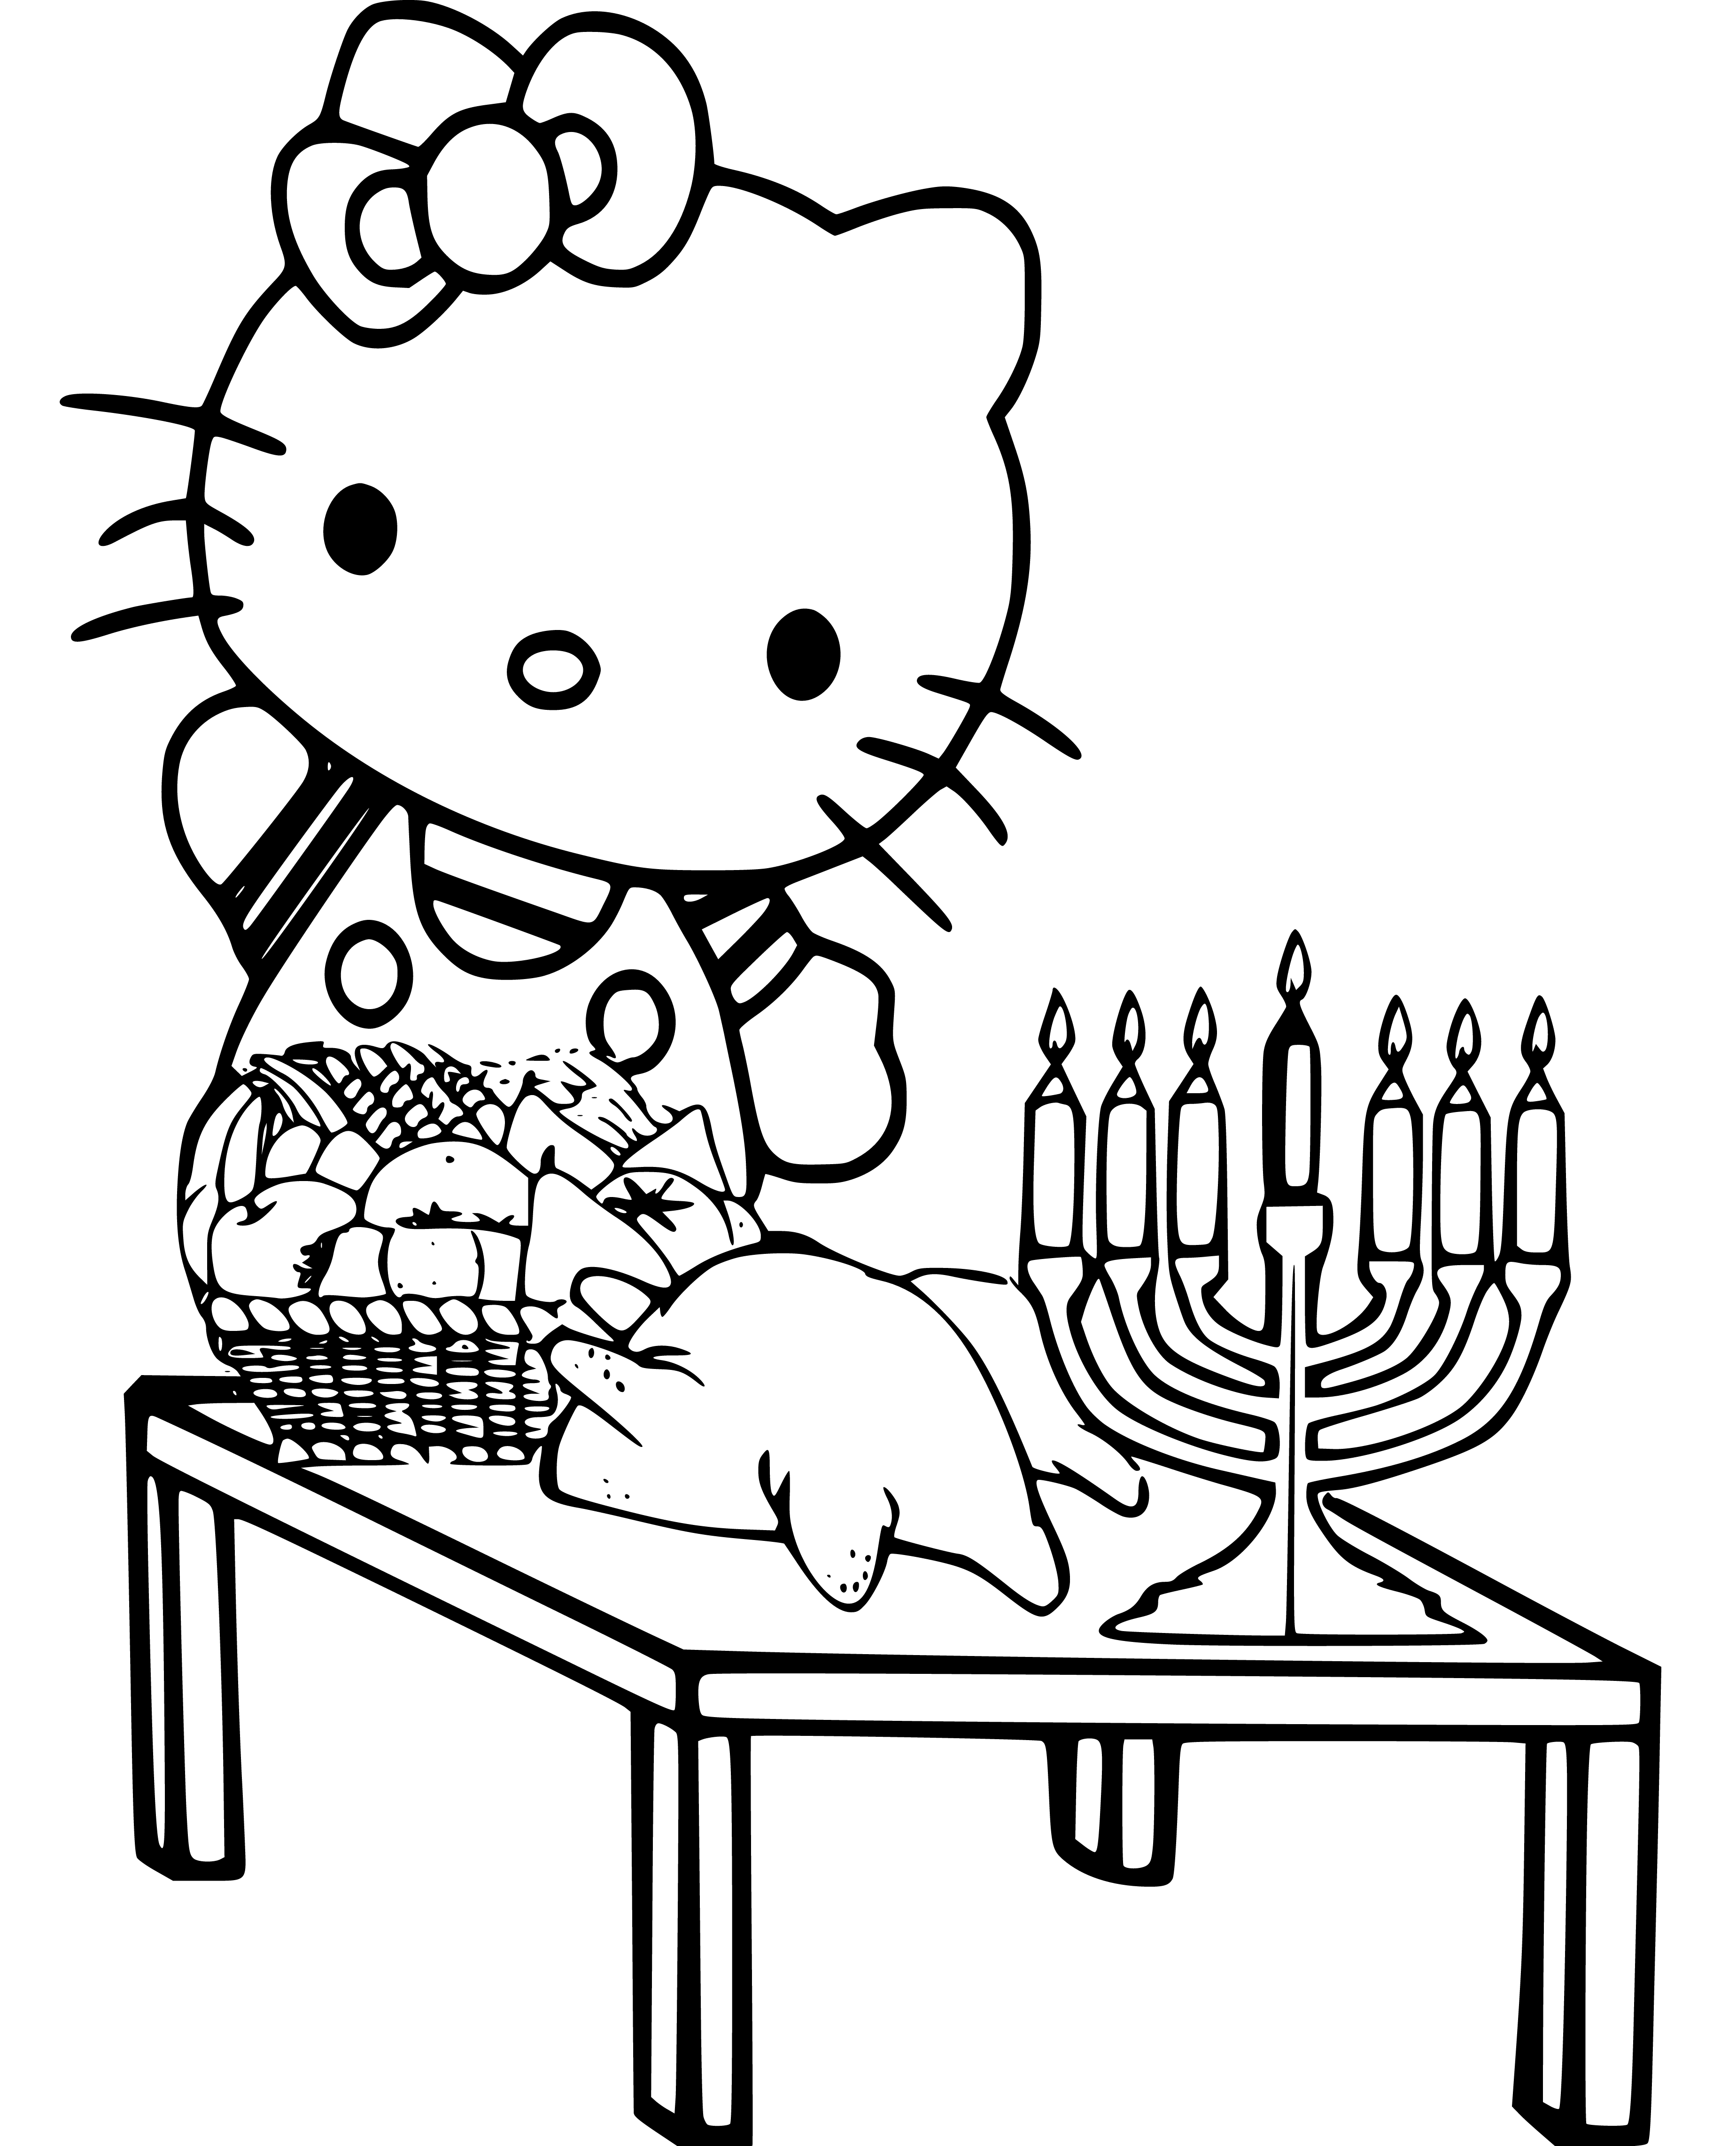 Hello Kitty Thanksgiving Coloring Page for Kids - SheetalColor.com